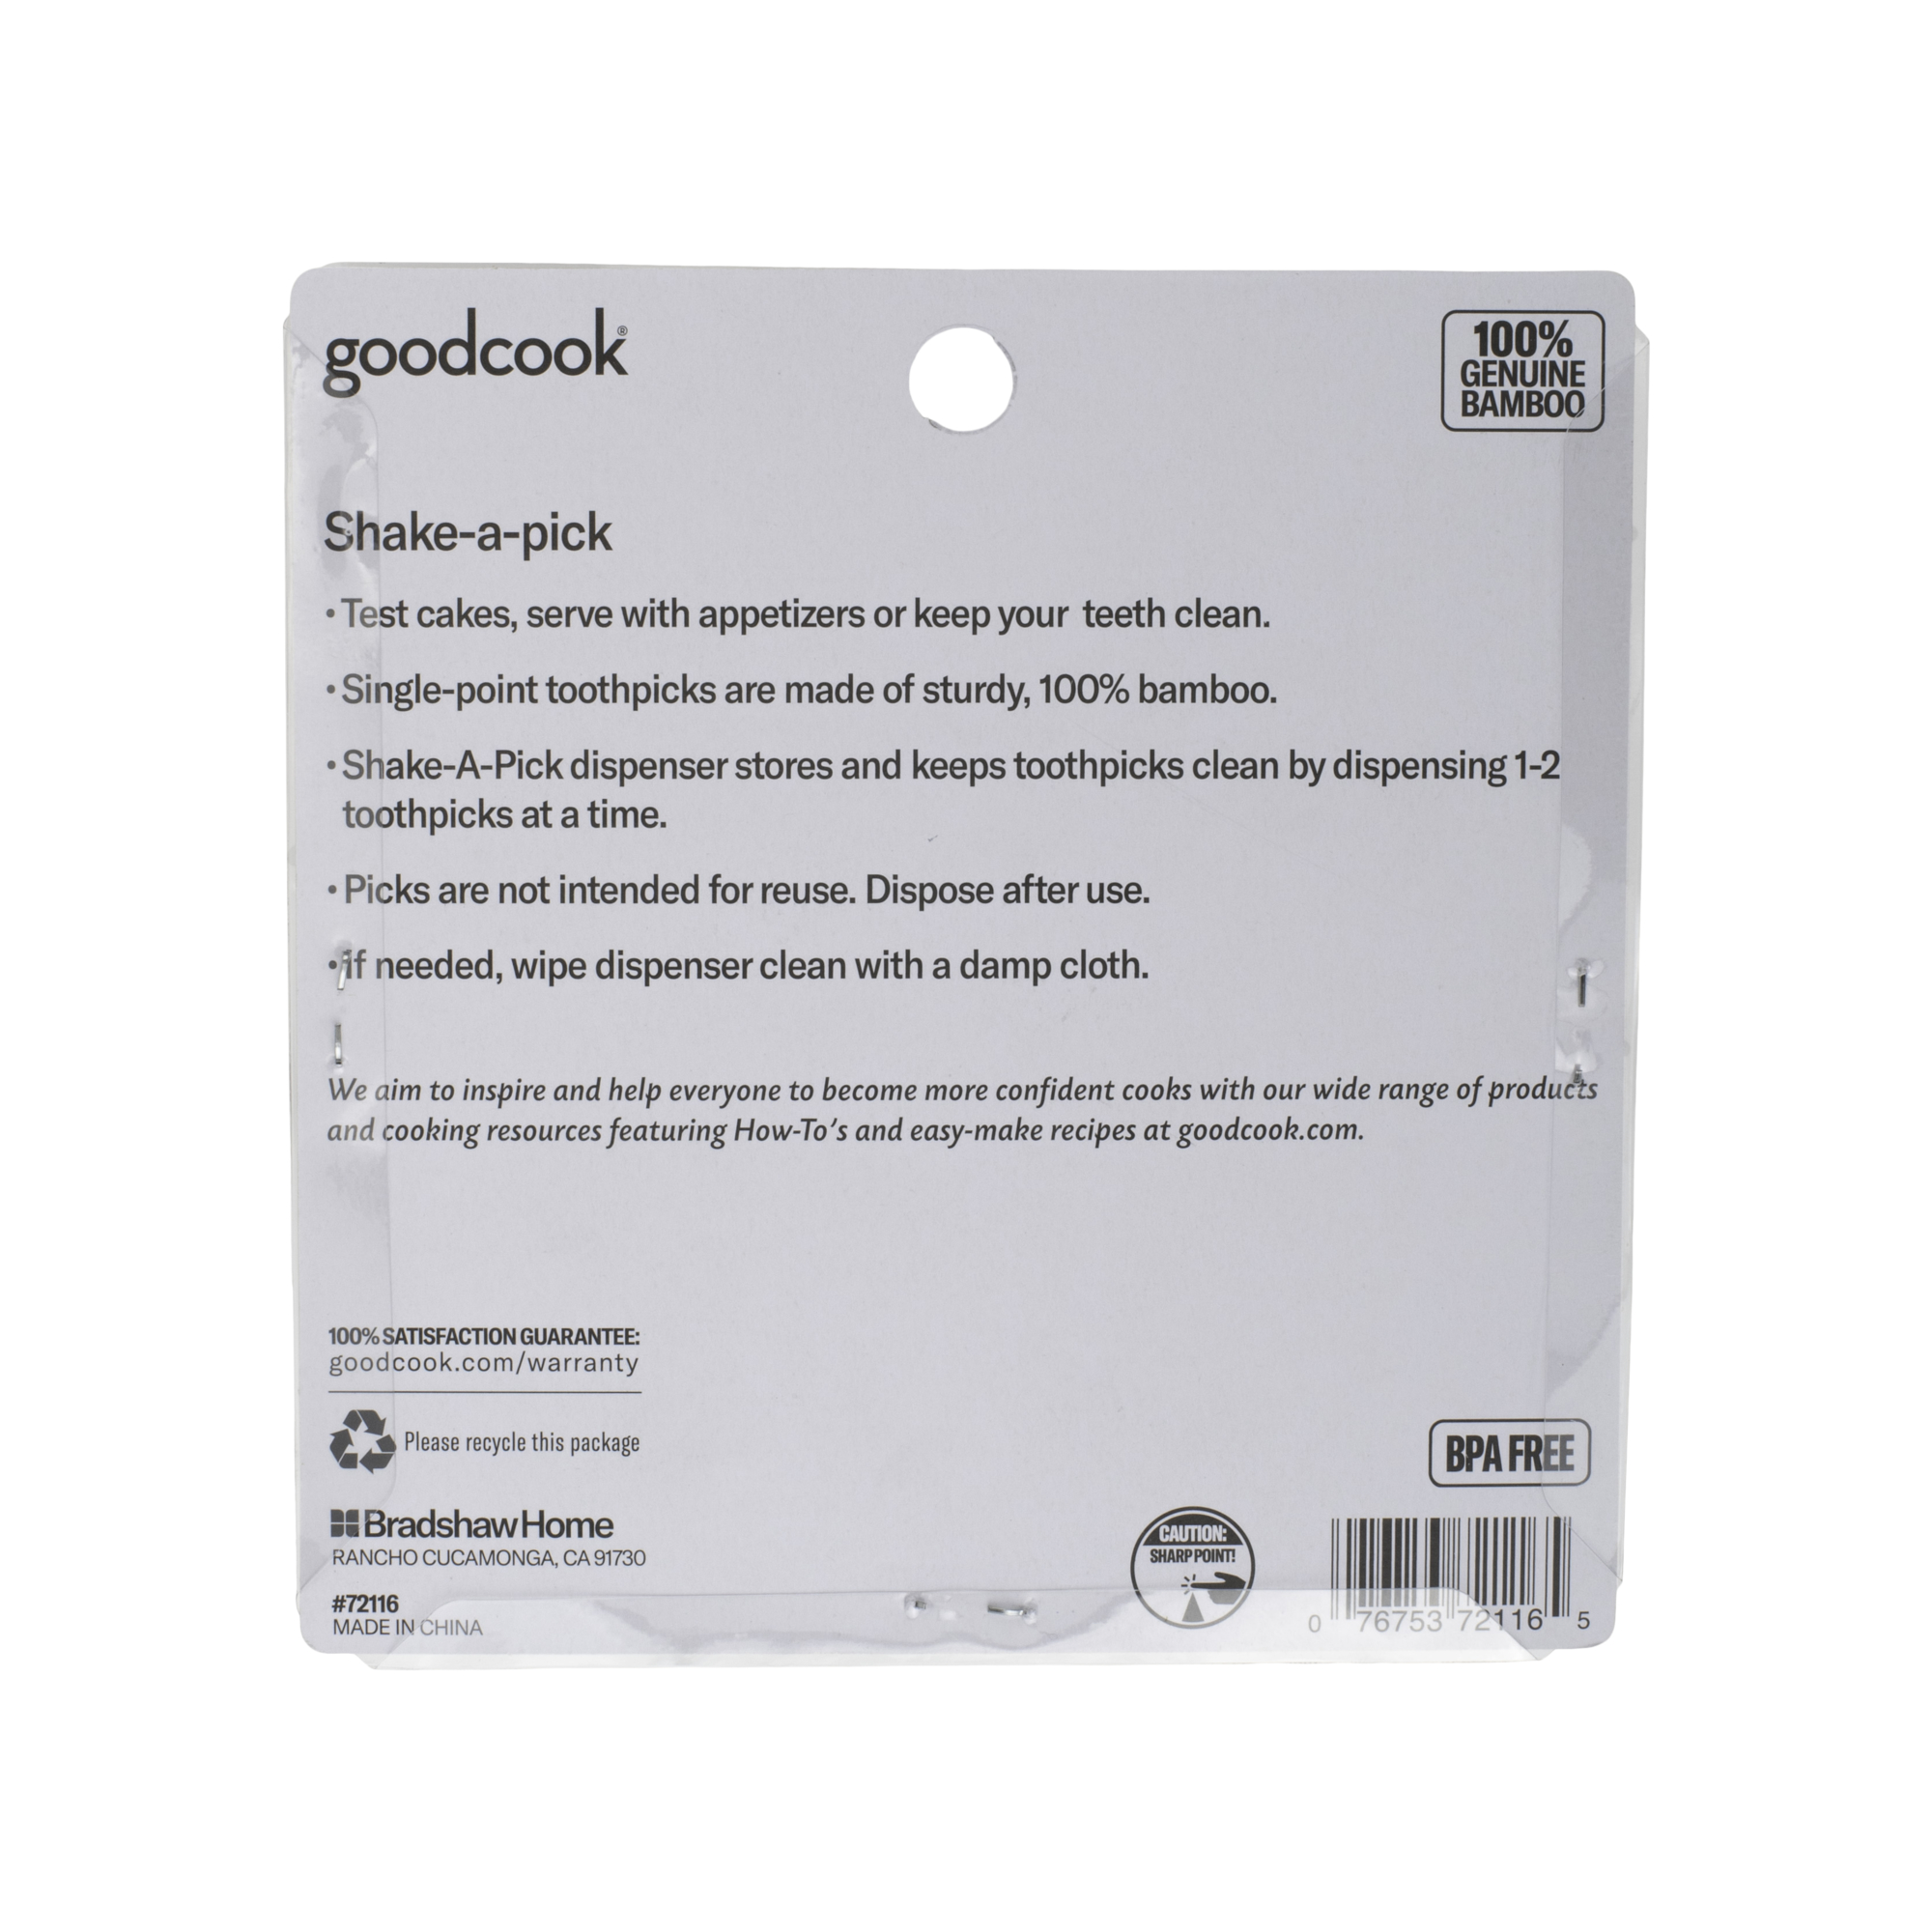 GoodCook PROfreshionals 2-Piece Shake-a-Pick Toothpick Dispenser Set with 400 Bamboo Toothpicks, 3.50" Height - image 5 of 5